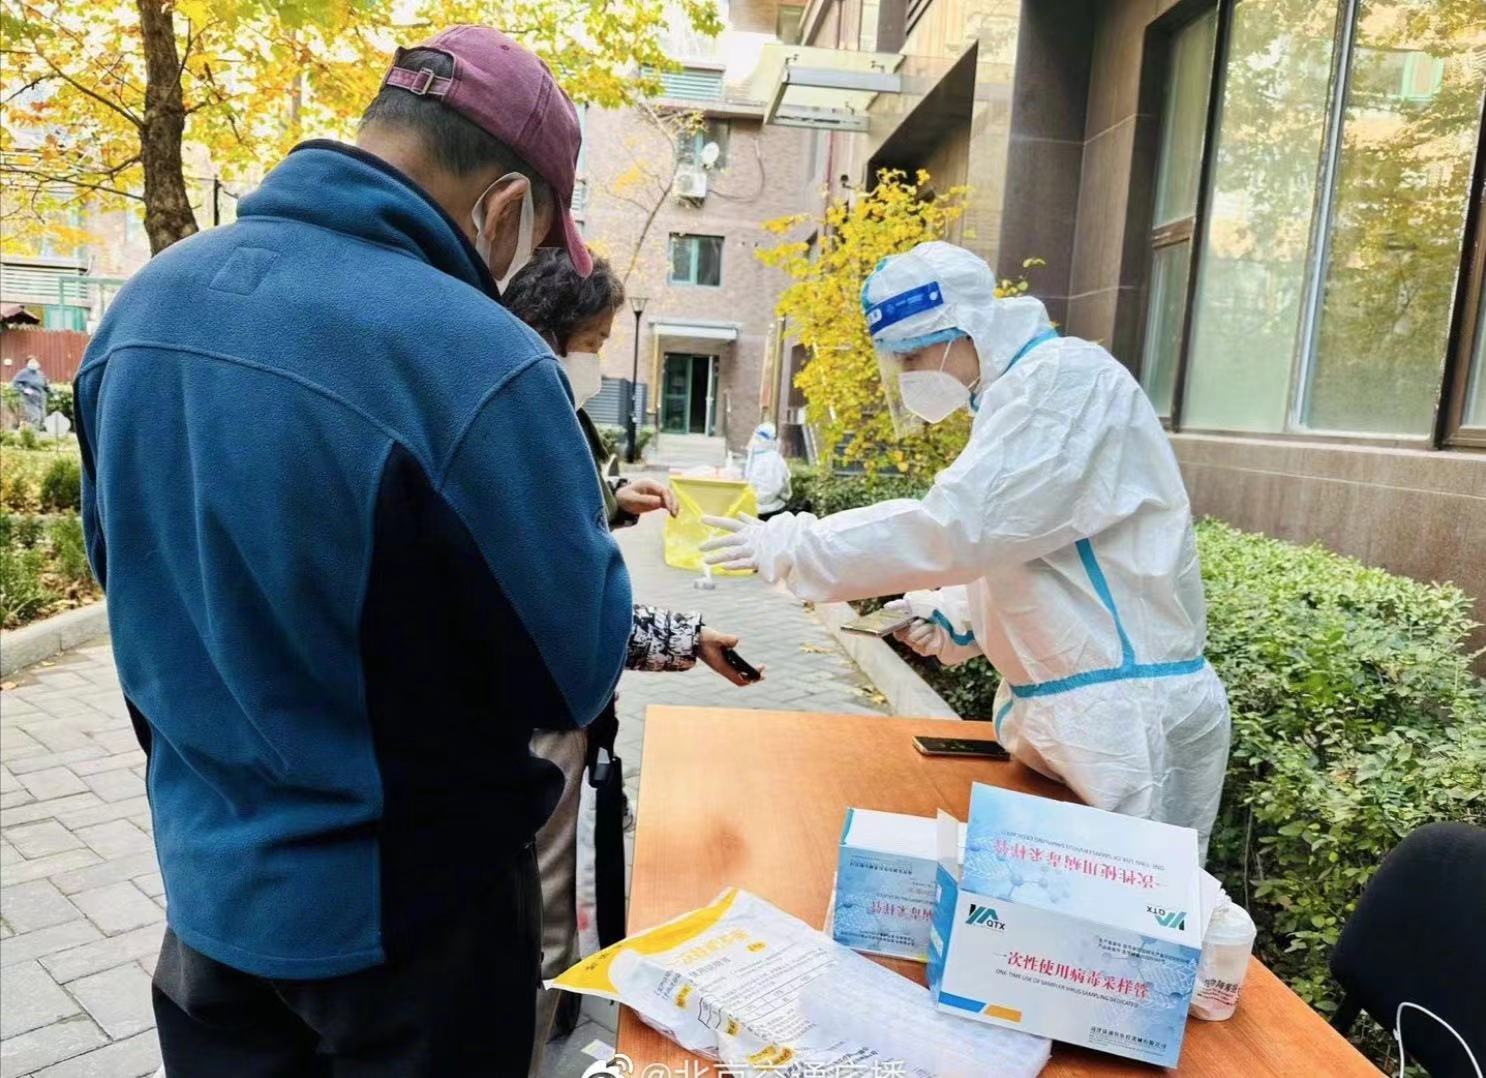 People in Beijing's Chaoyang district are getting nucleic acid tests in their neighborhood. The city’s numerous nucleic acid testing sites for large-scale testing that had been set up along the roadsides and around commercial and office areas were temporarily closed in Chaoyang district starting from Monday, which is to prevent people from cross infection during nucleic acid testing. Photo: ifeng